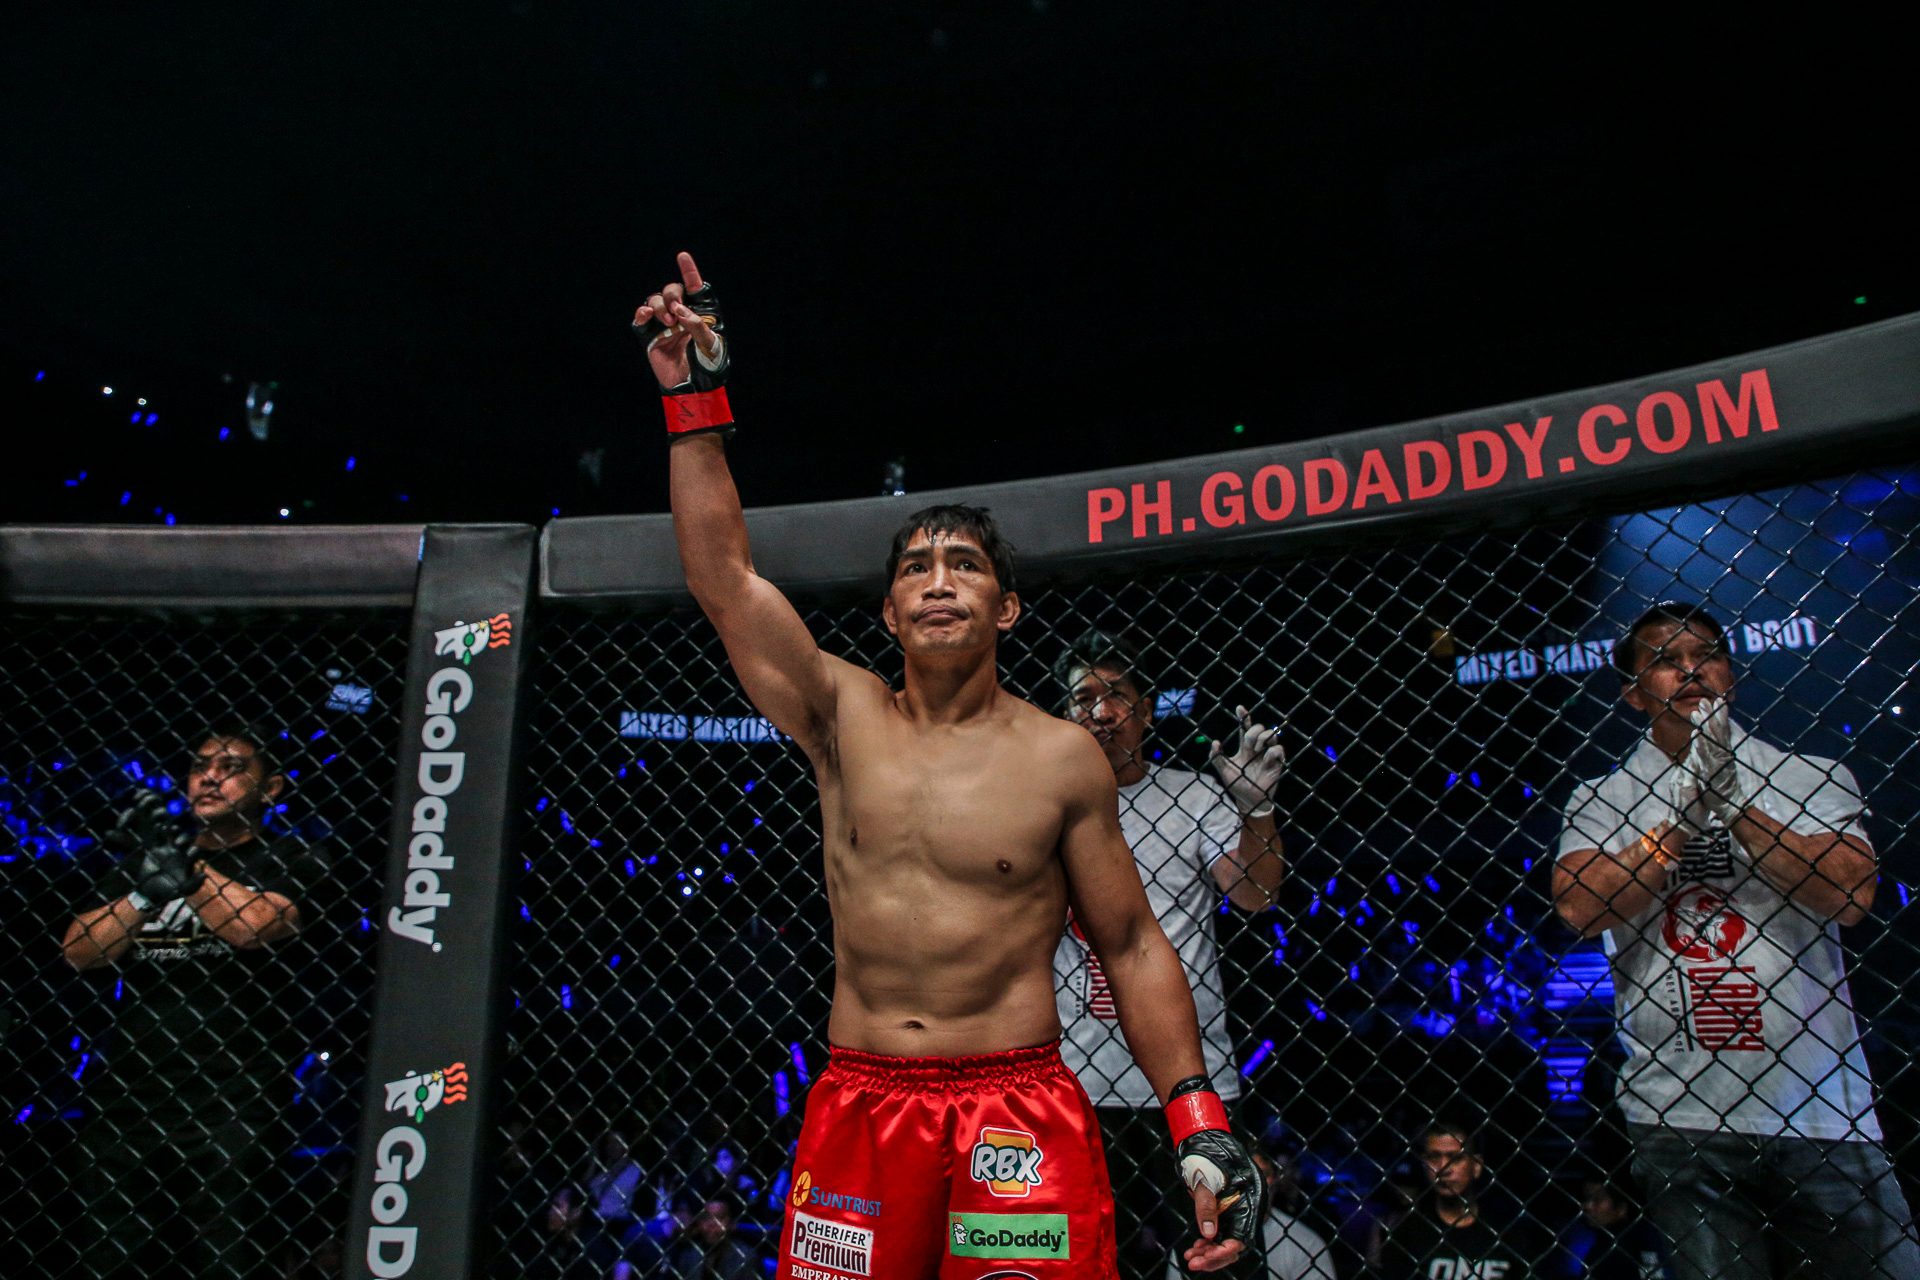 Folayang to face former UFC champion Alvarez in ONE